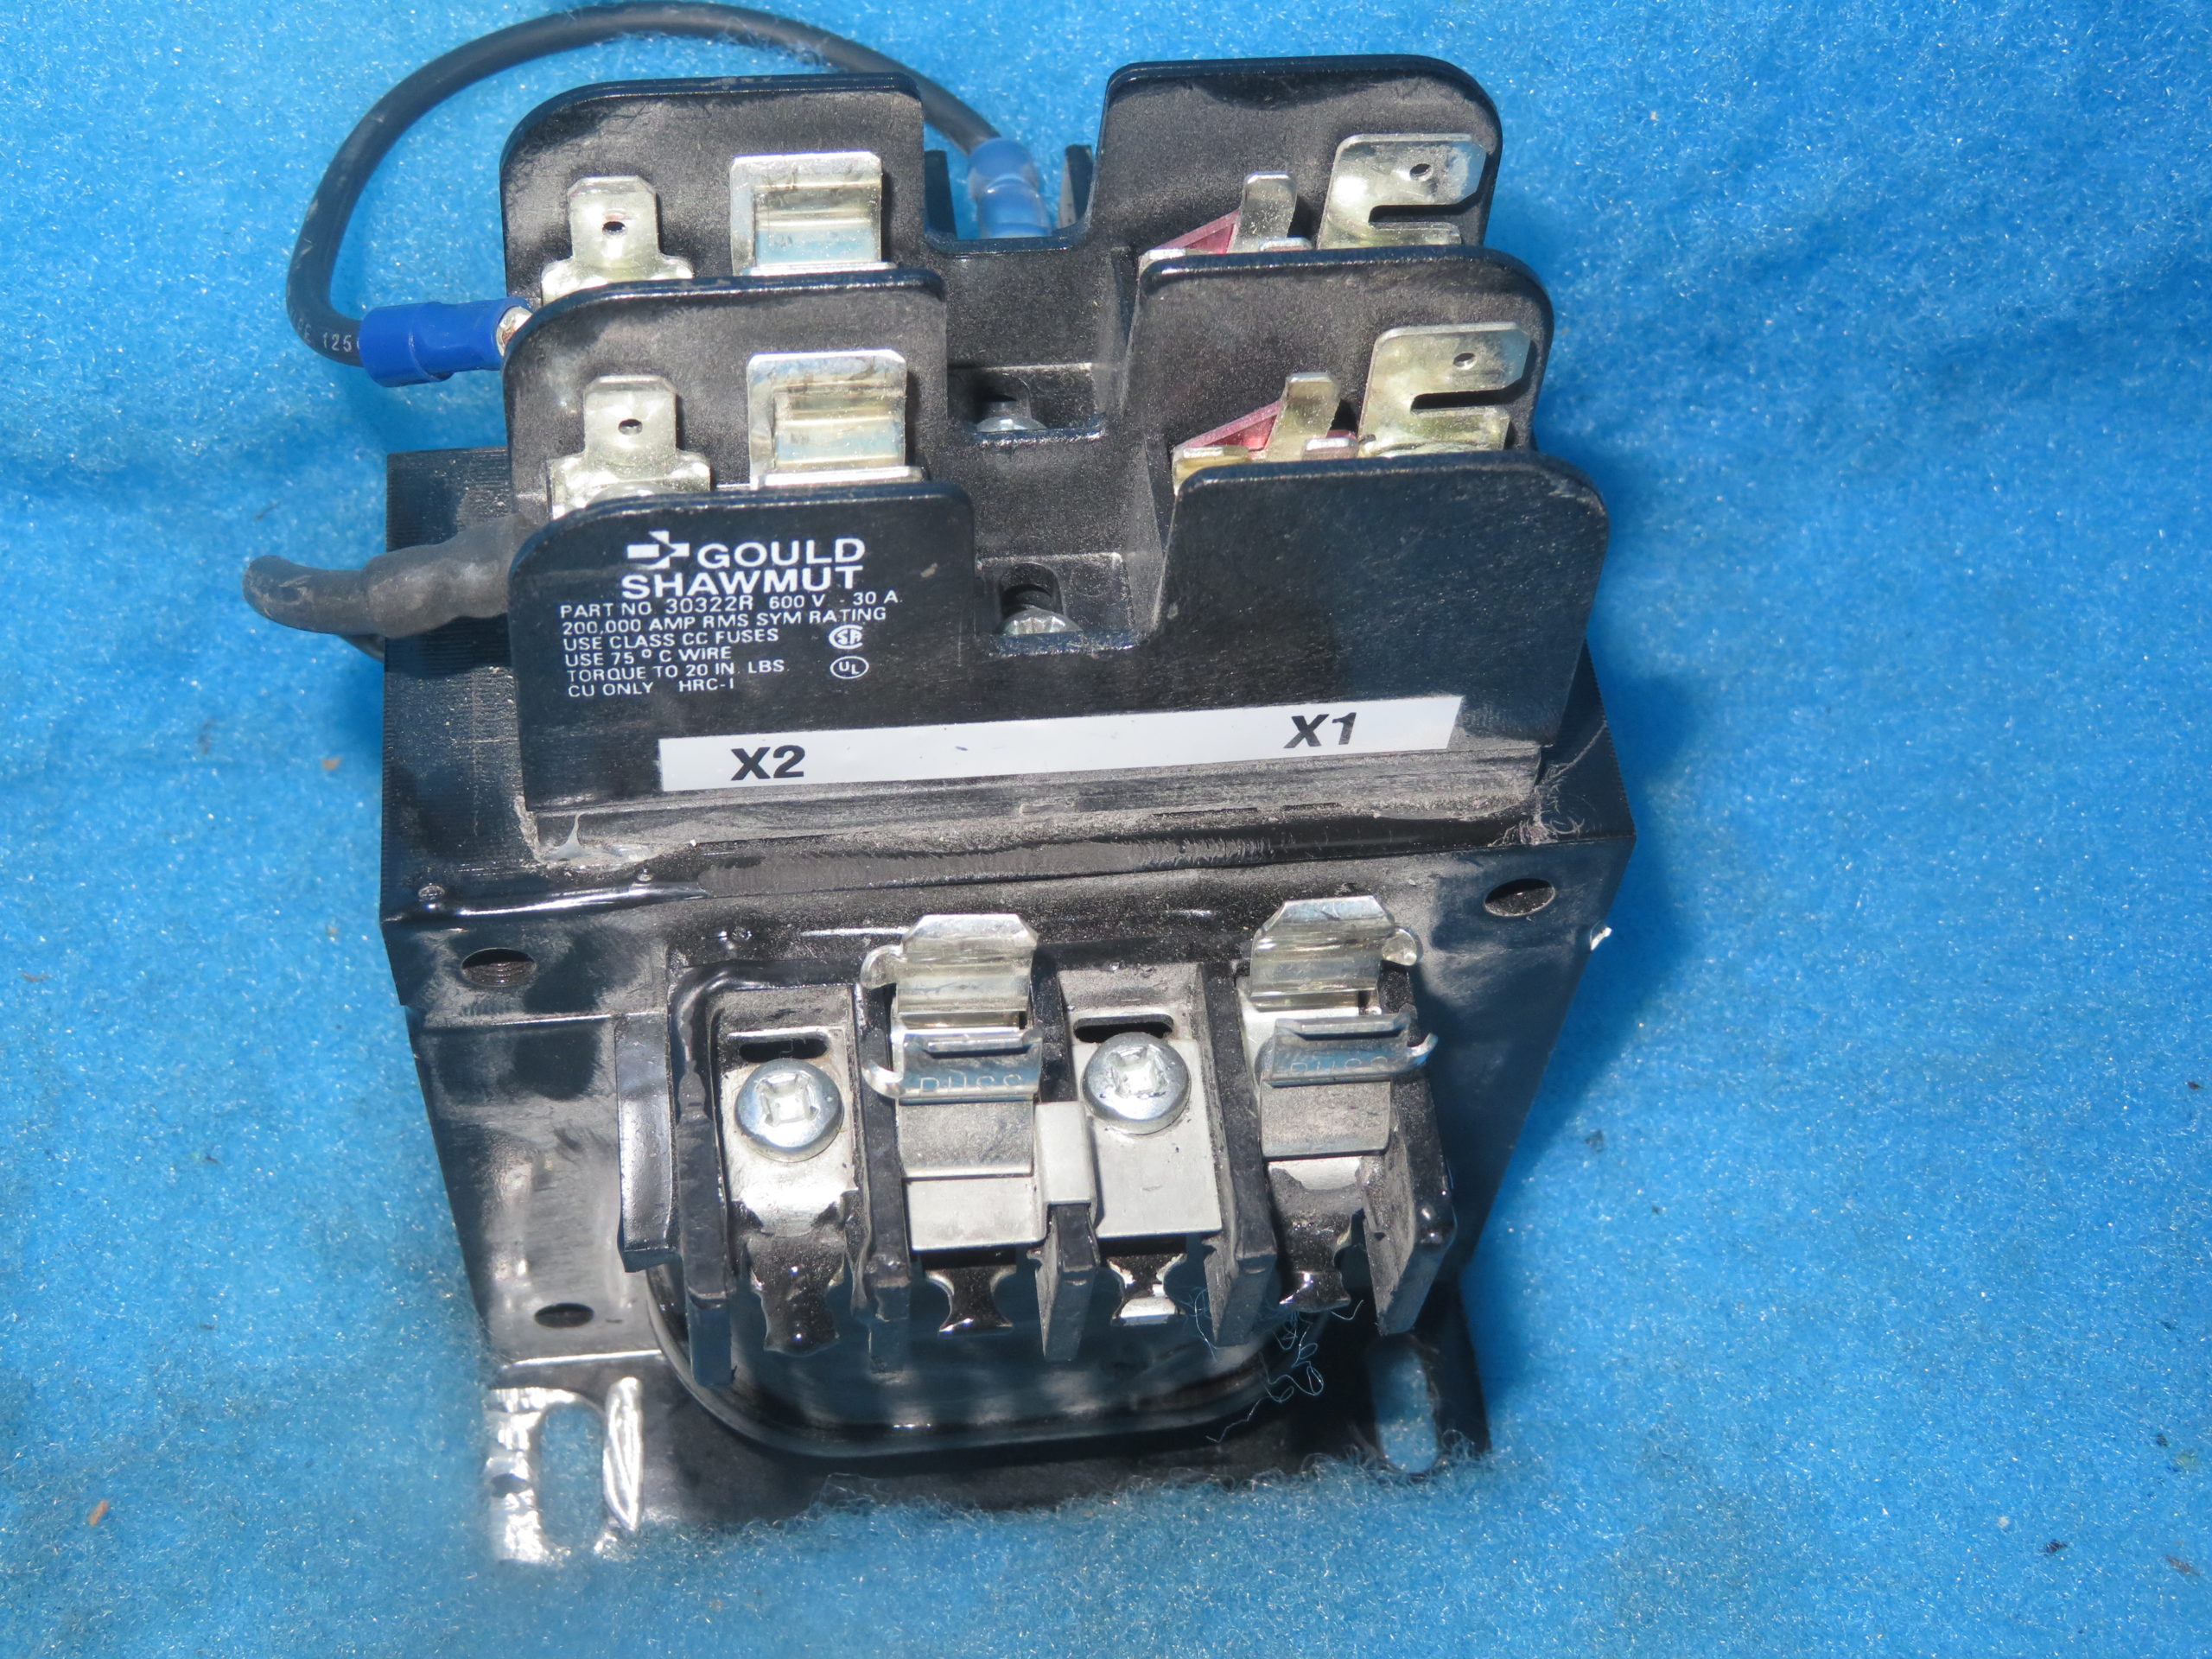 Hammond Manufacturing 143206 Industrial Control 1 Ph Transformer 3aua478001a1 for sale online 